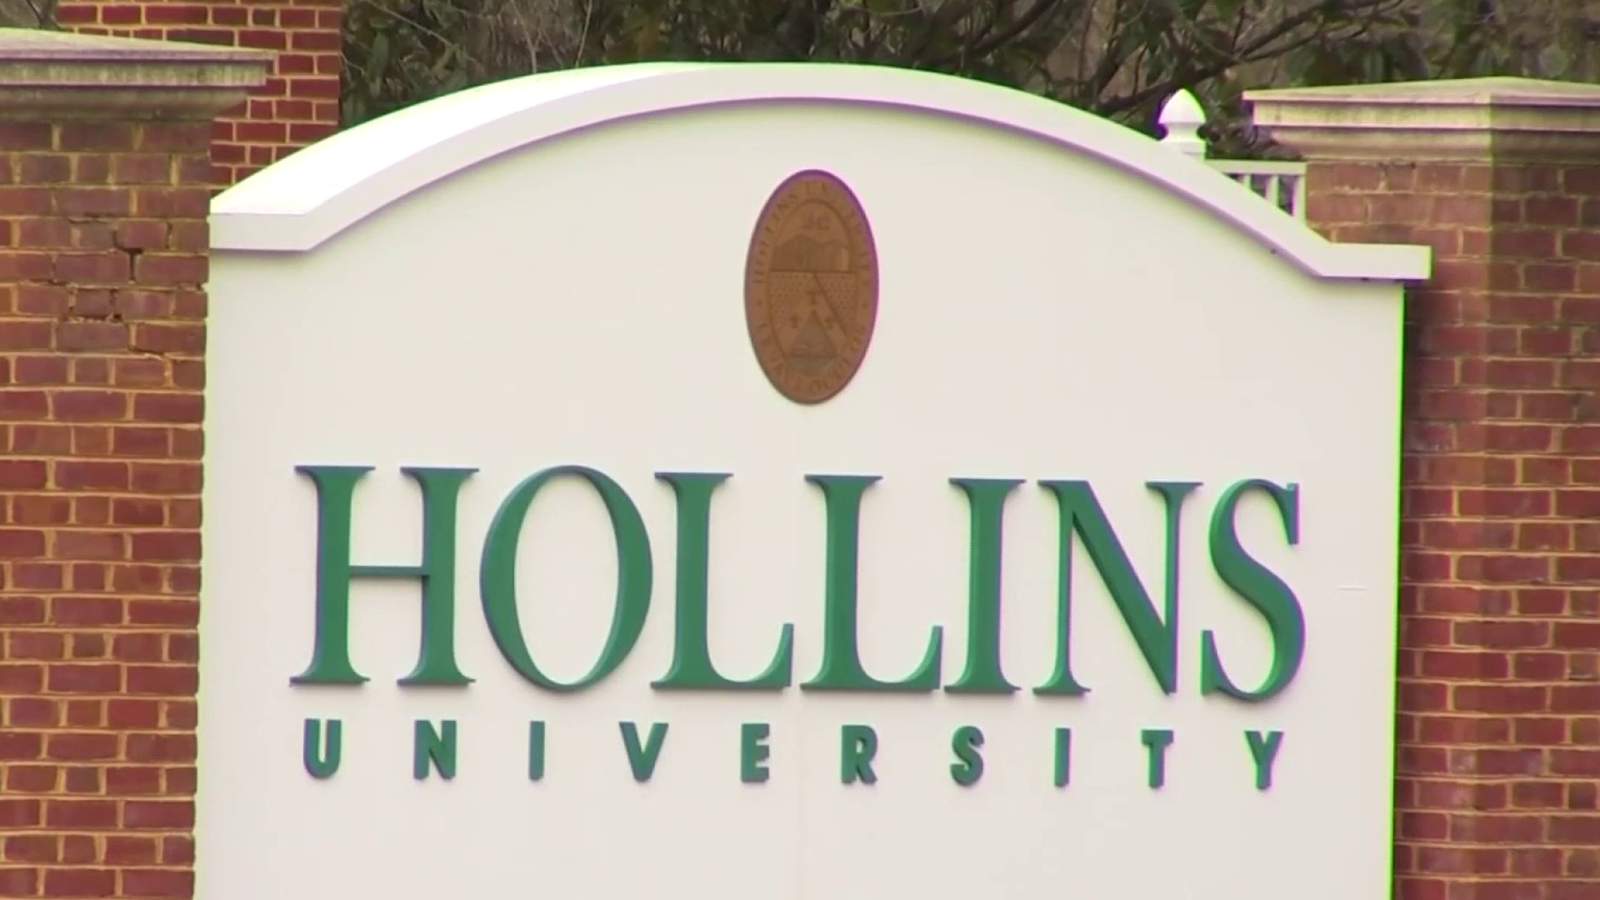 Human remains found on Hollins University’s campus